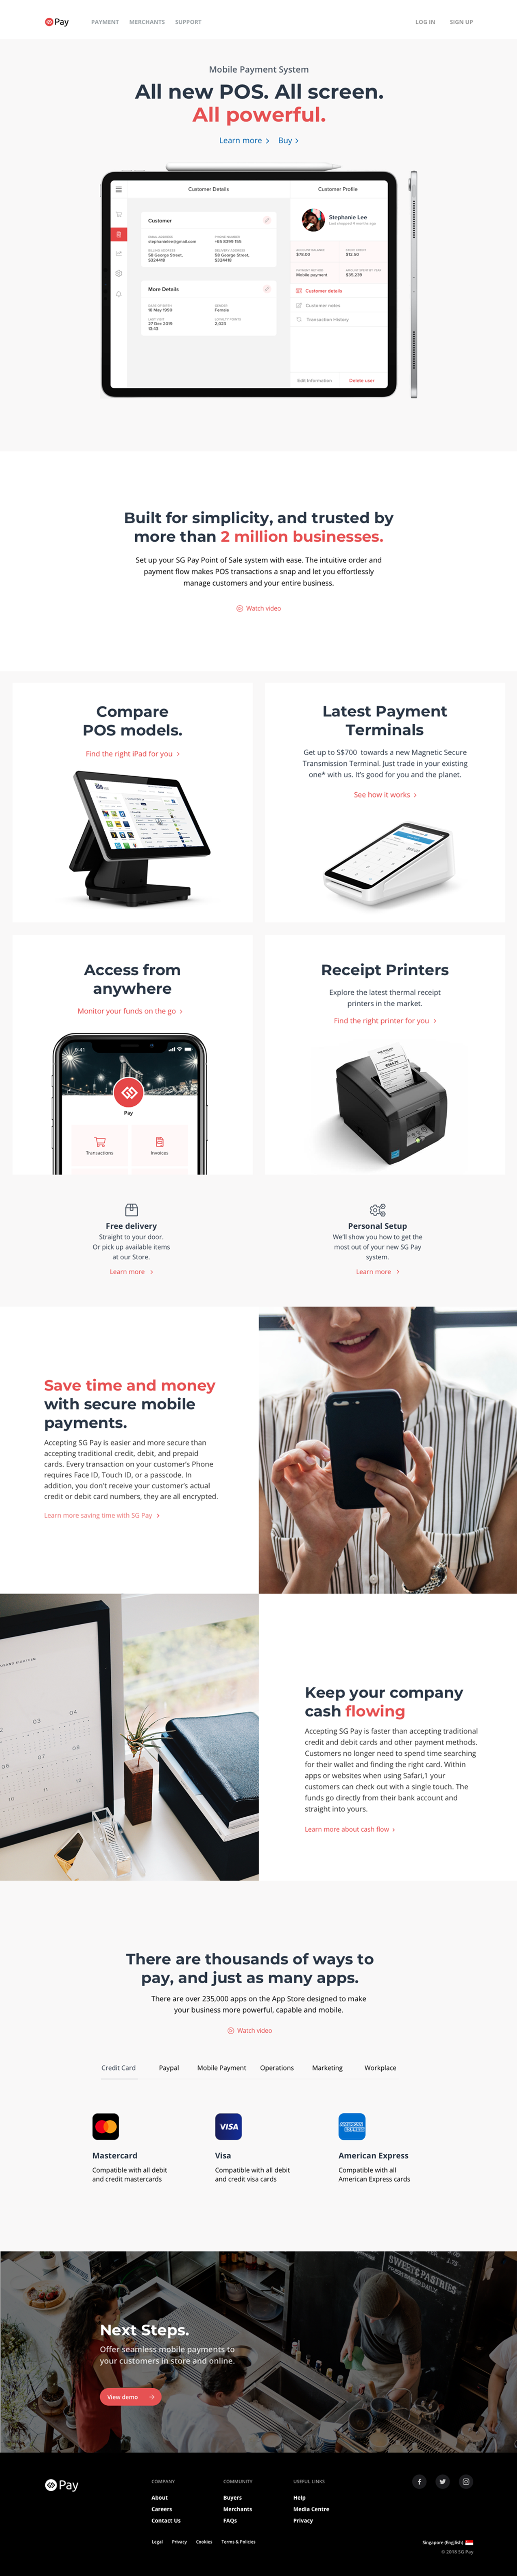 Mobile payment system showcase